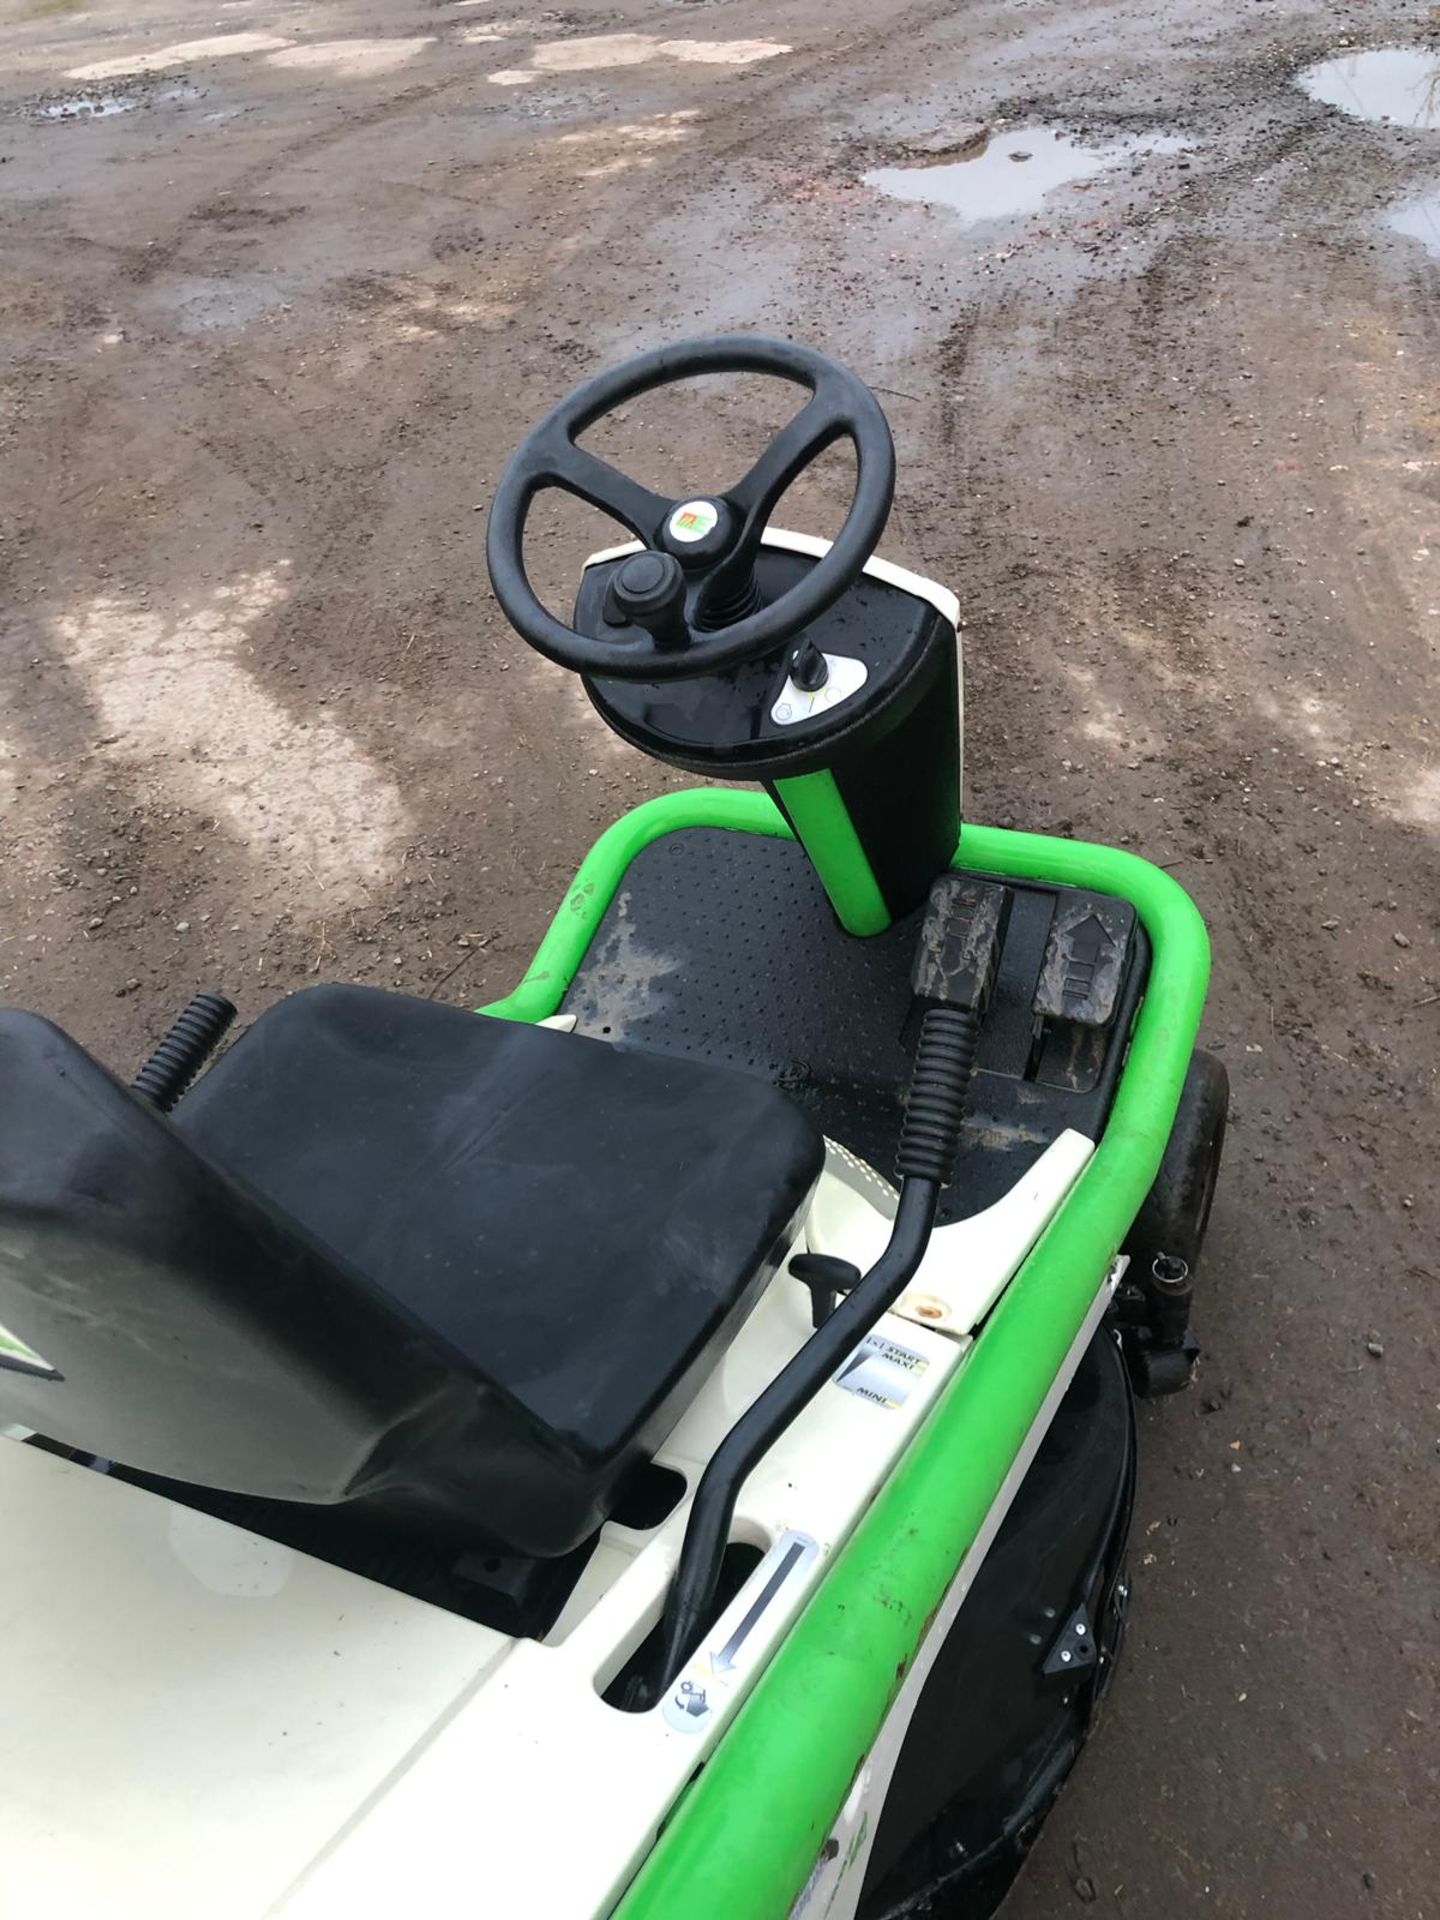 ETESIA BAHIA MBHE RIDE ON LAWN MOWER, YEAR 2012, RUNS WORKS AND CUTS *NO VAT* - Image 5 of 6